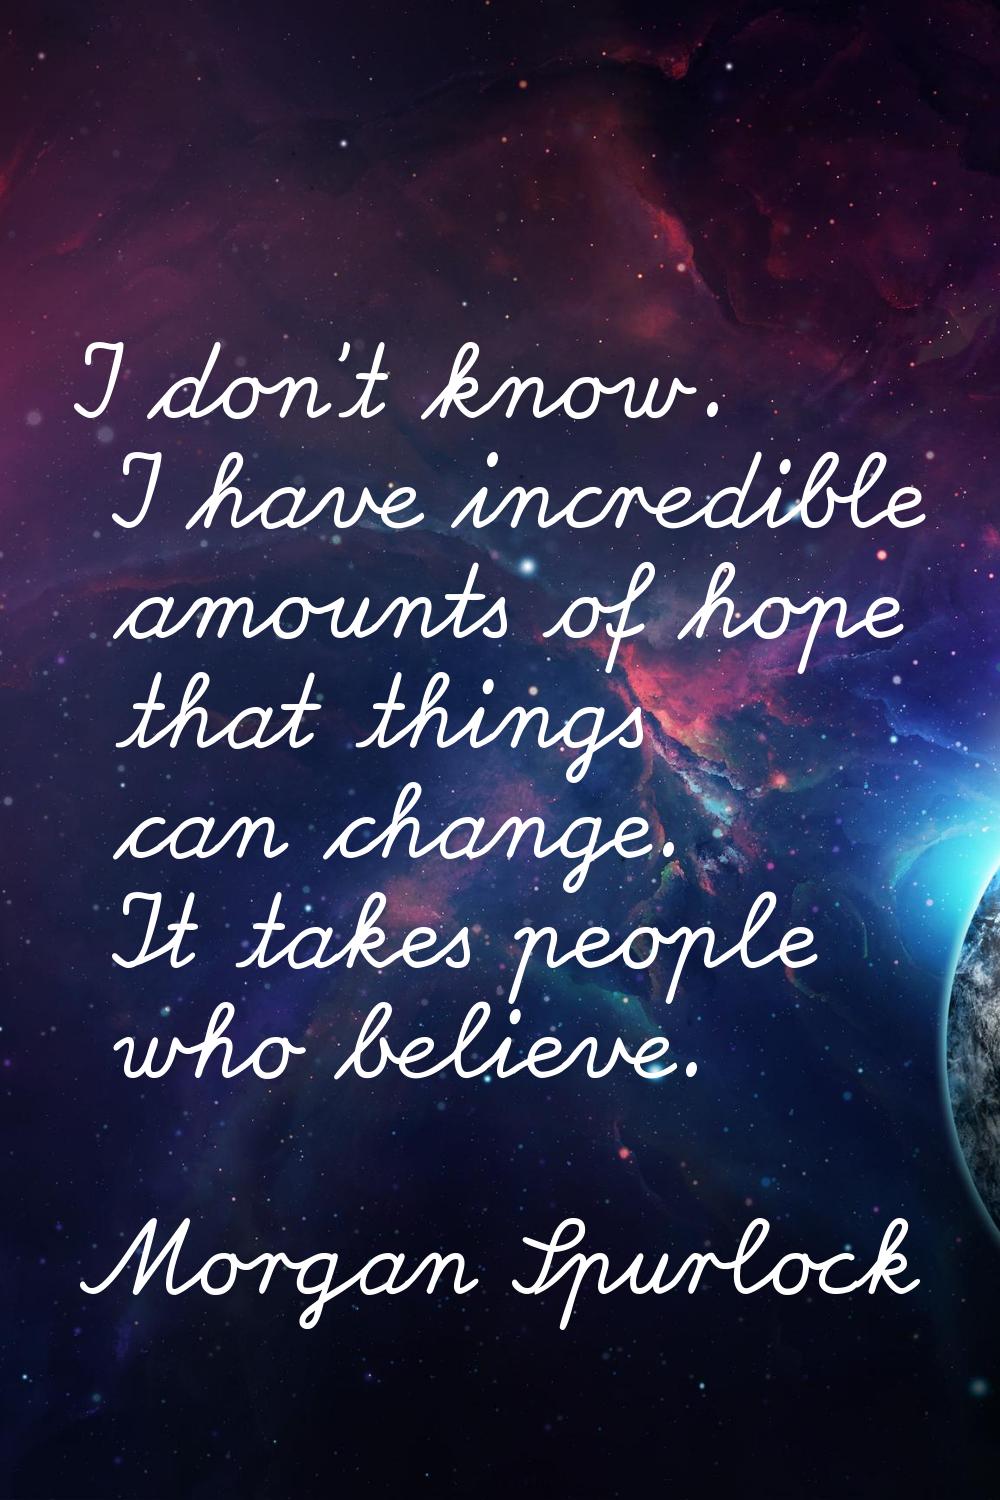 I don't know. I have incredible amounts of hope that things can change. It takes people who believe